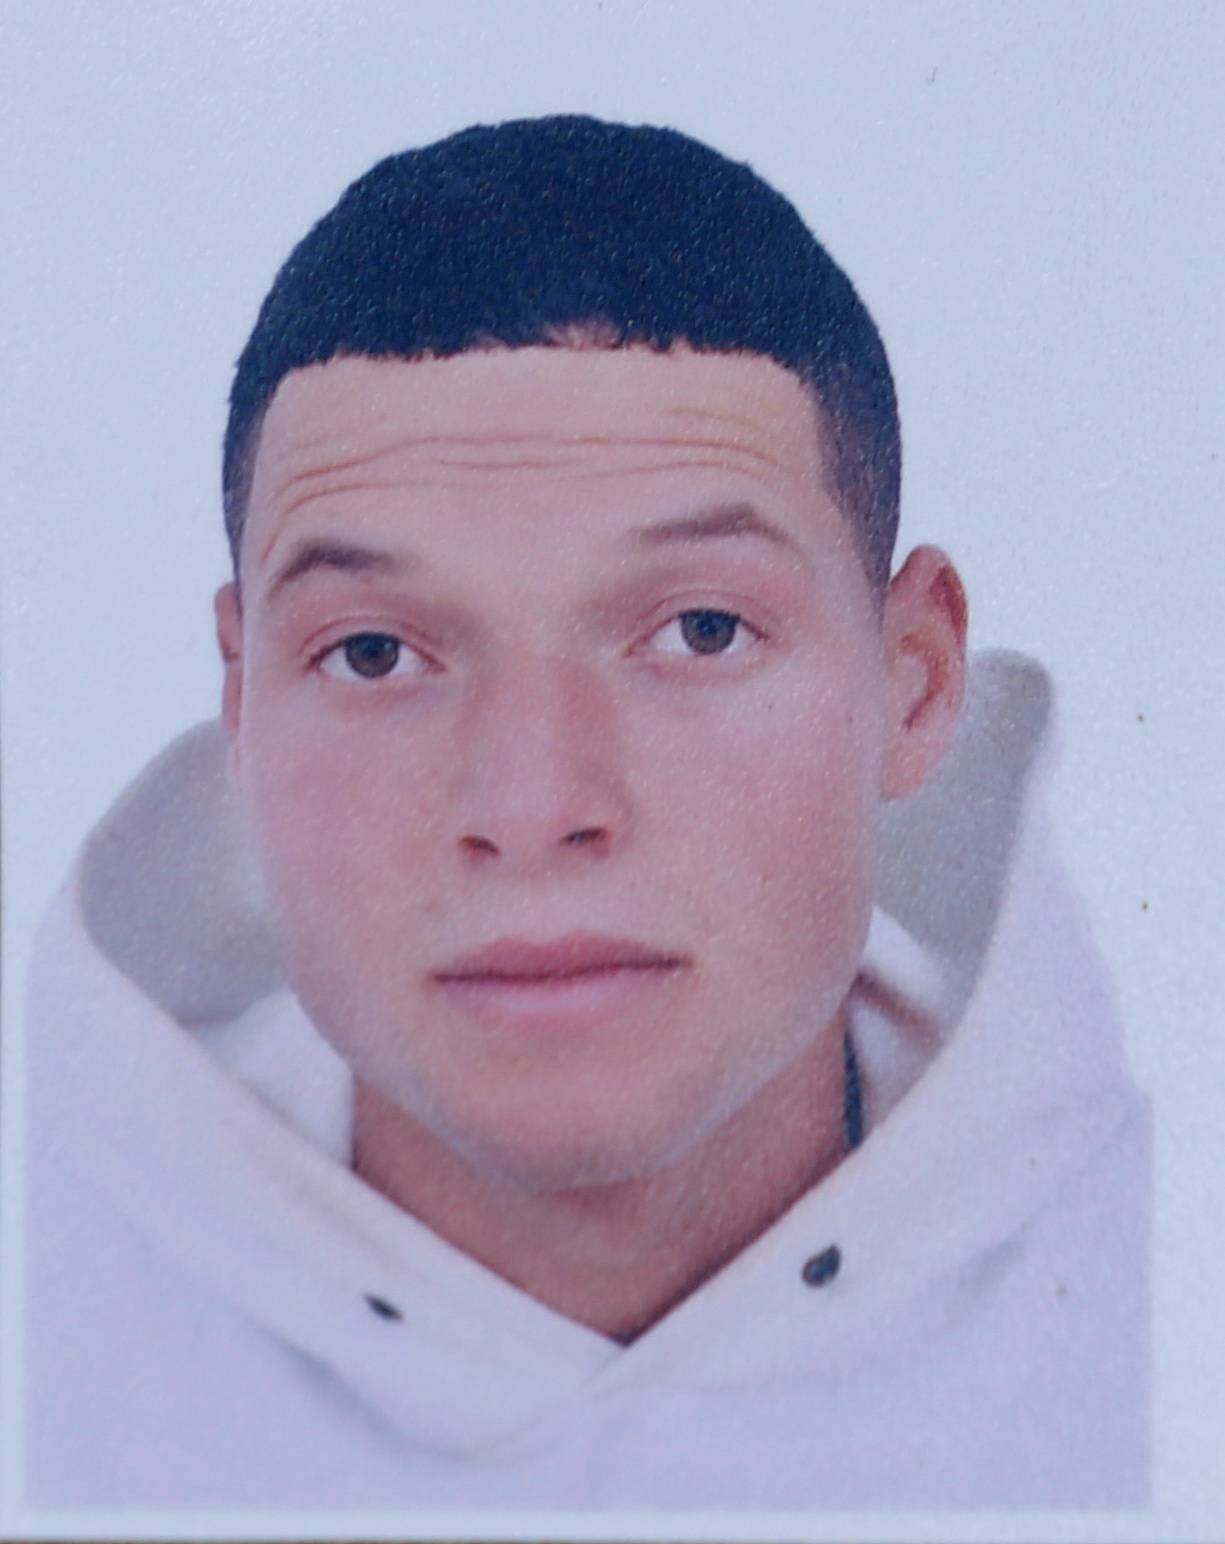 A picture of Brahim al-Aouissaoui, who is suspected by French police and Tunisian security officials of carrying out Thursday's attack in Nice, is seen in this undated photo provided by his family